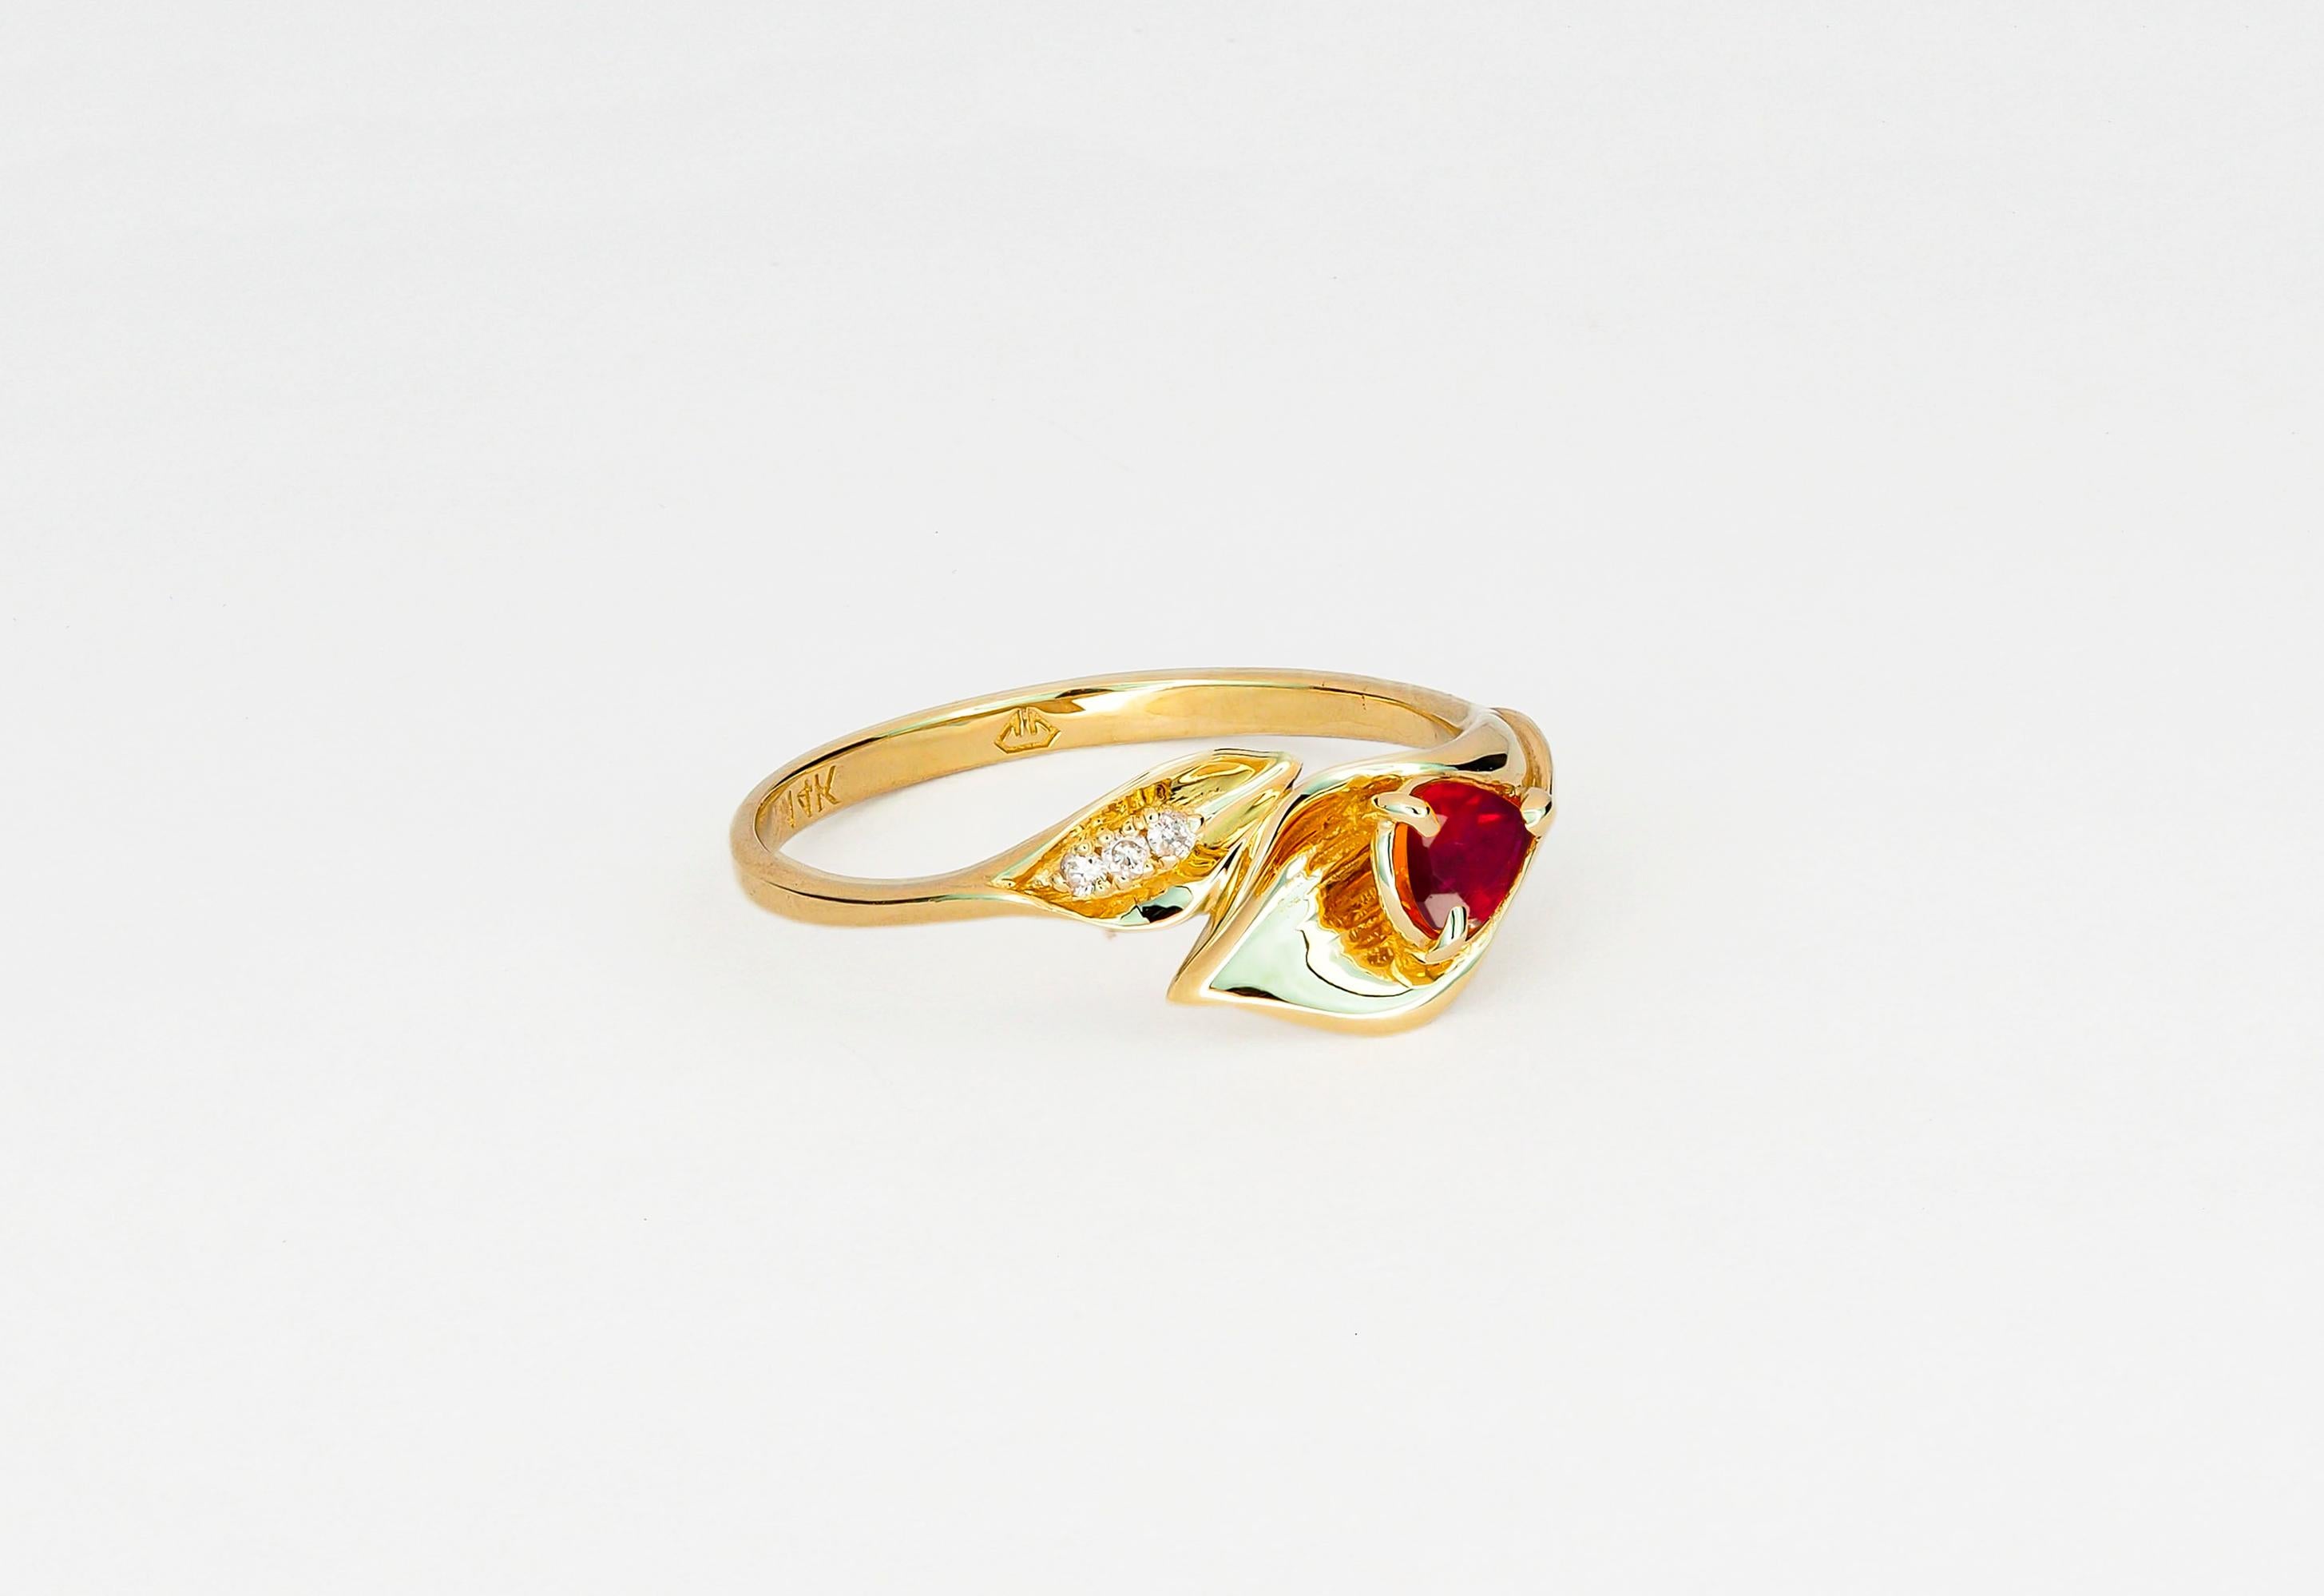 For Sale:  Lily Calla Gold Ring, 14 Karat Gold Ring with Ruby and Diamonds! 5